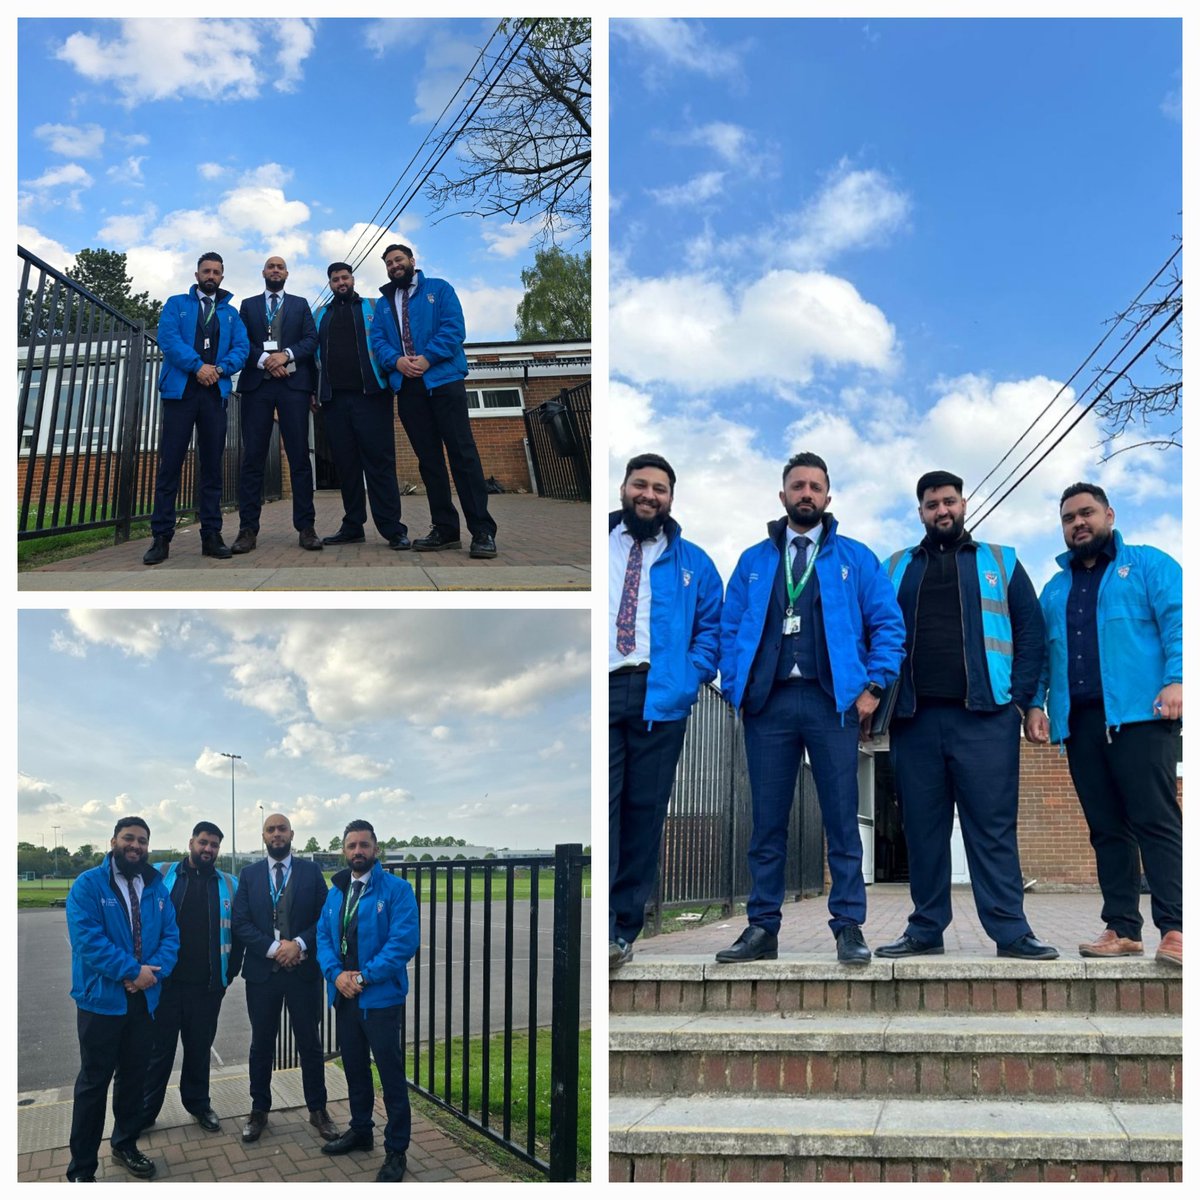 Here are the men in blue 💎. Matched by the cobalt sky 🤗 😁 @markmailer @CHSGheadteacher @ChallneyBoys @Challney_Girls @Aabid_Khan_ @unlock_educate @ShafiTeachesit @unleashing_me